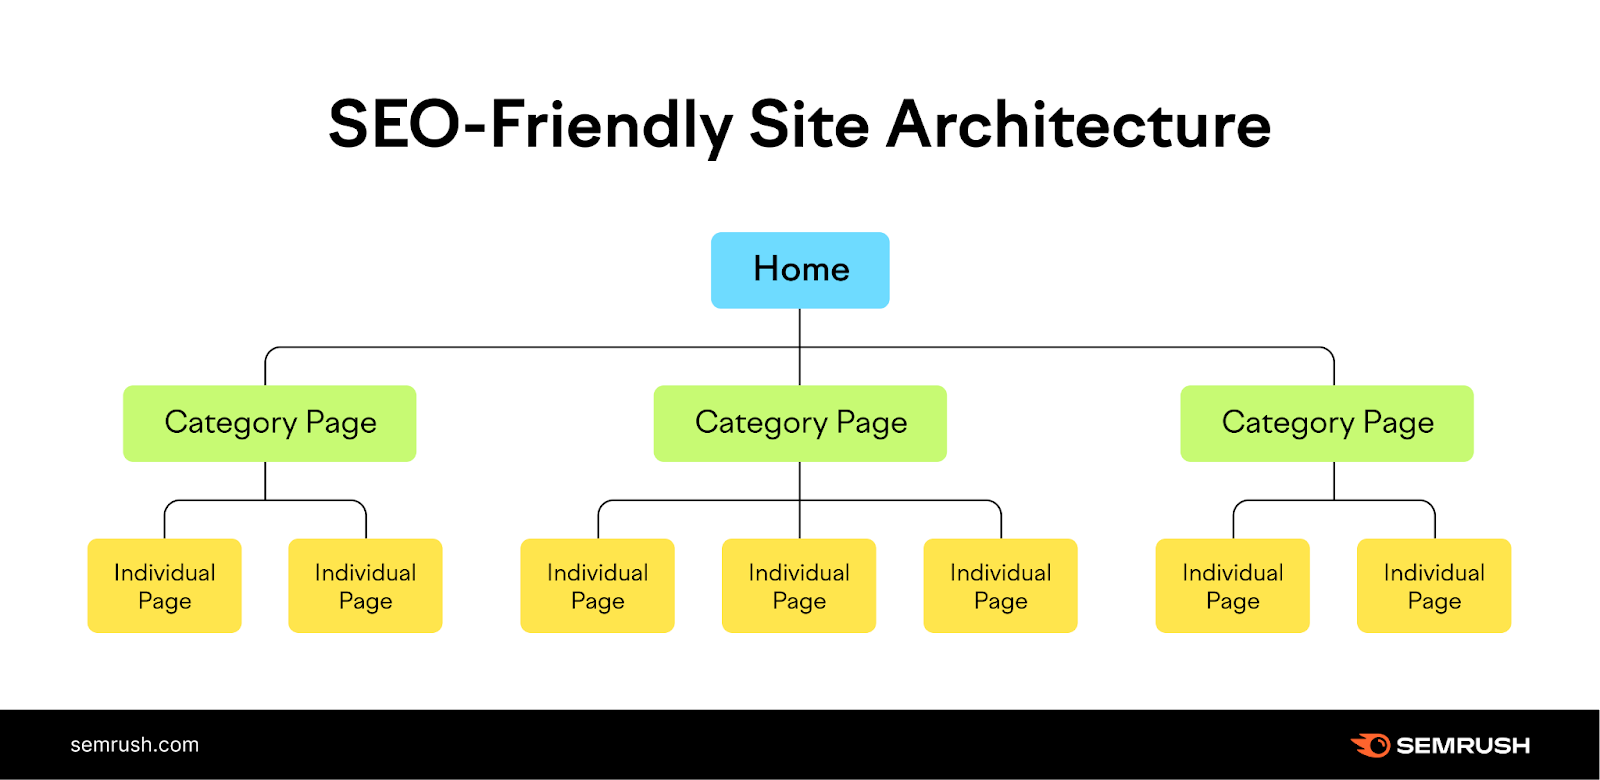 An image showing SEO-friendly site architecture